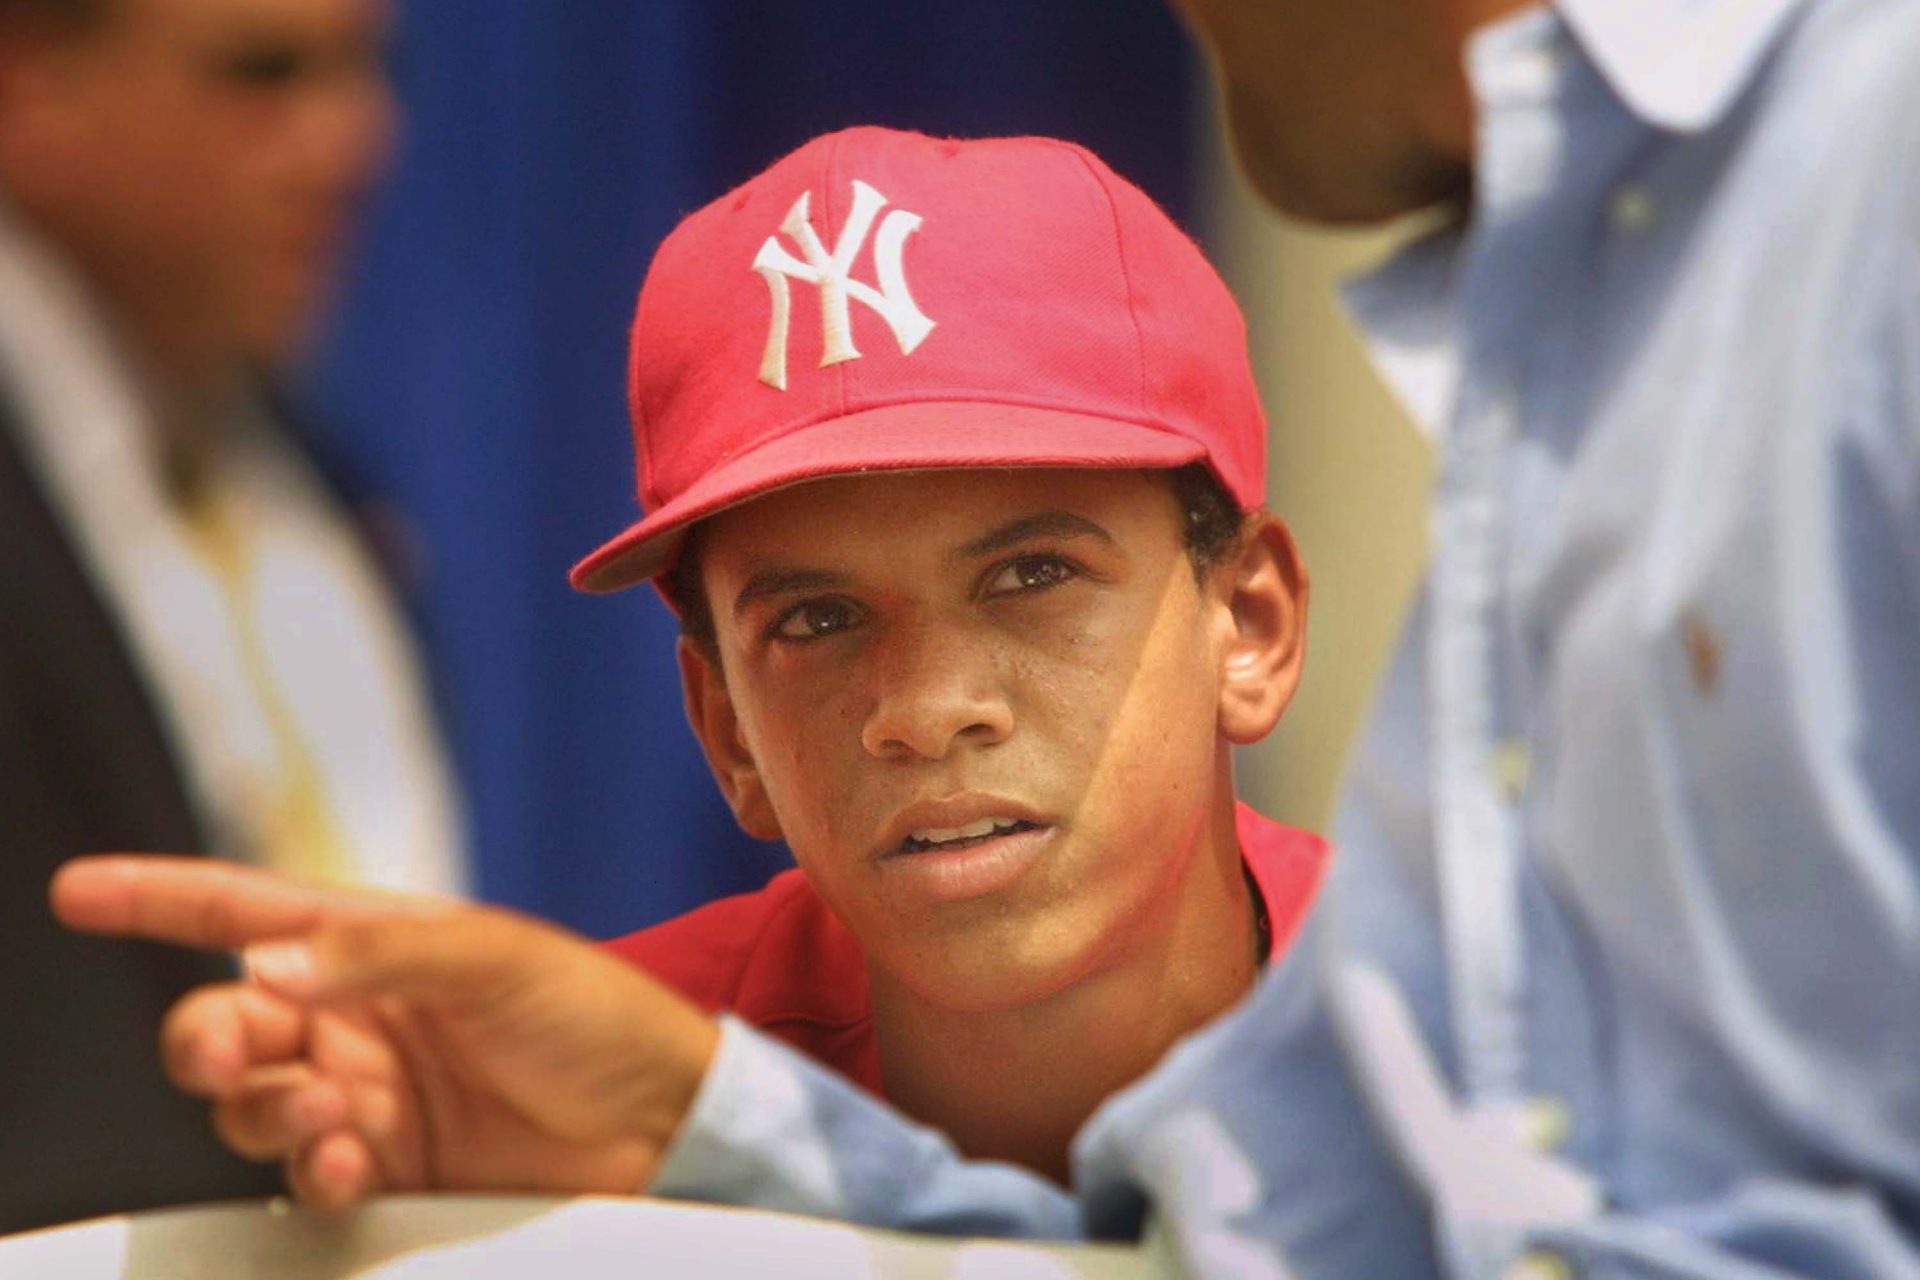 What happened to disgraced Little League star Danny Almonte?